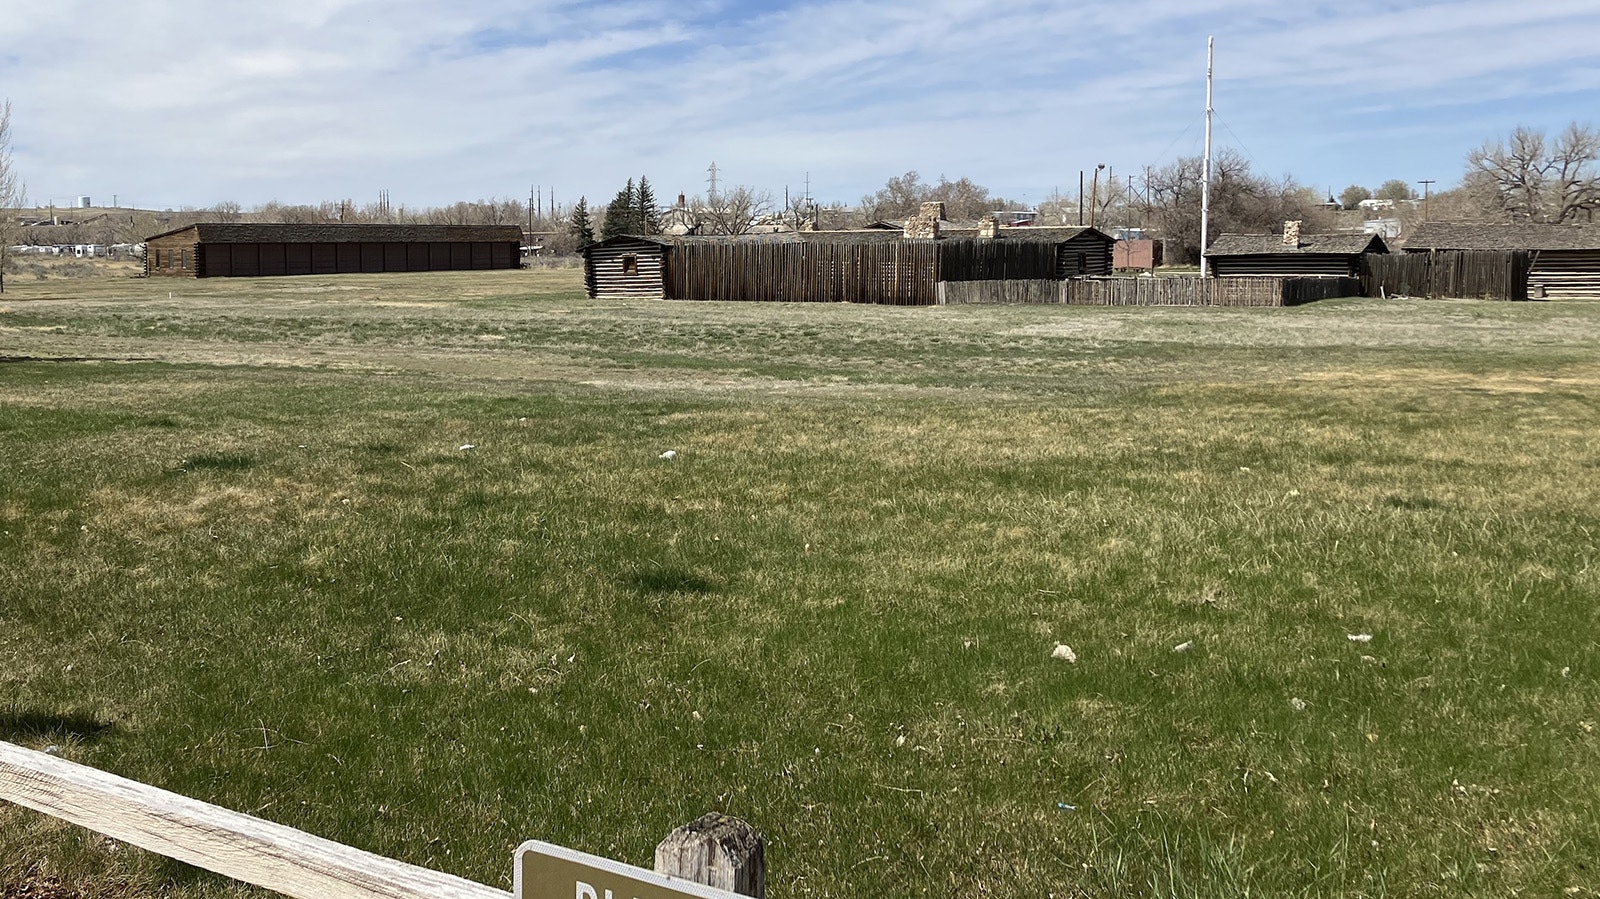 Activity on the grounds at Fort Caspar along the banks of North Platte River sometimes trigger paranormal devices and lead to hard-to-explain occurrences.